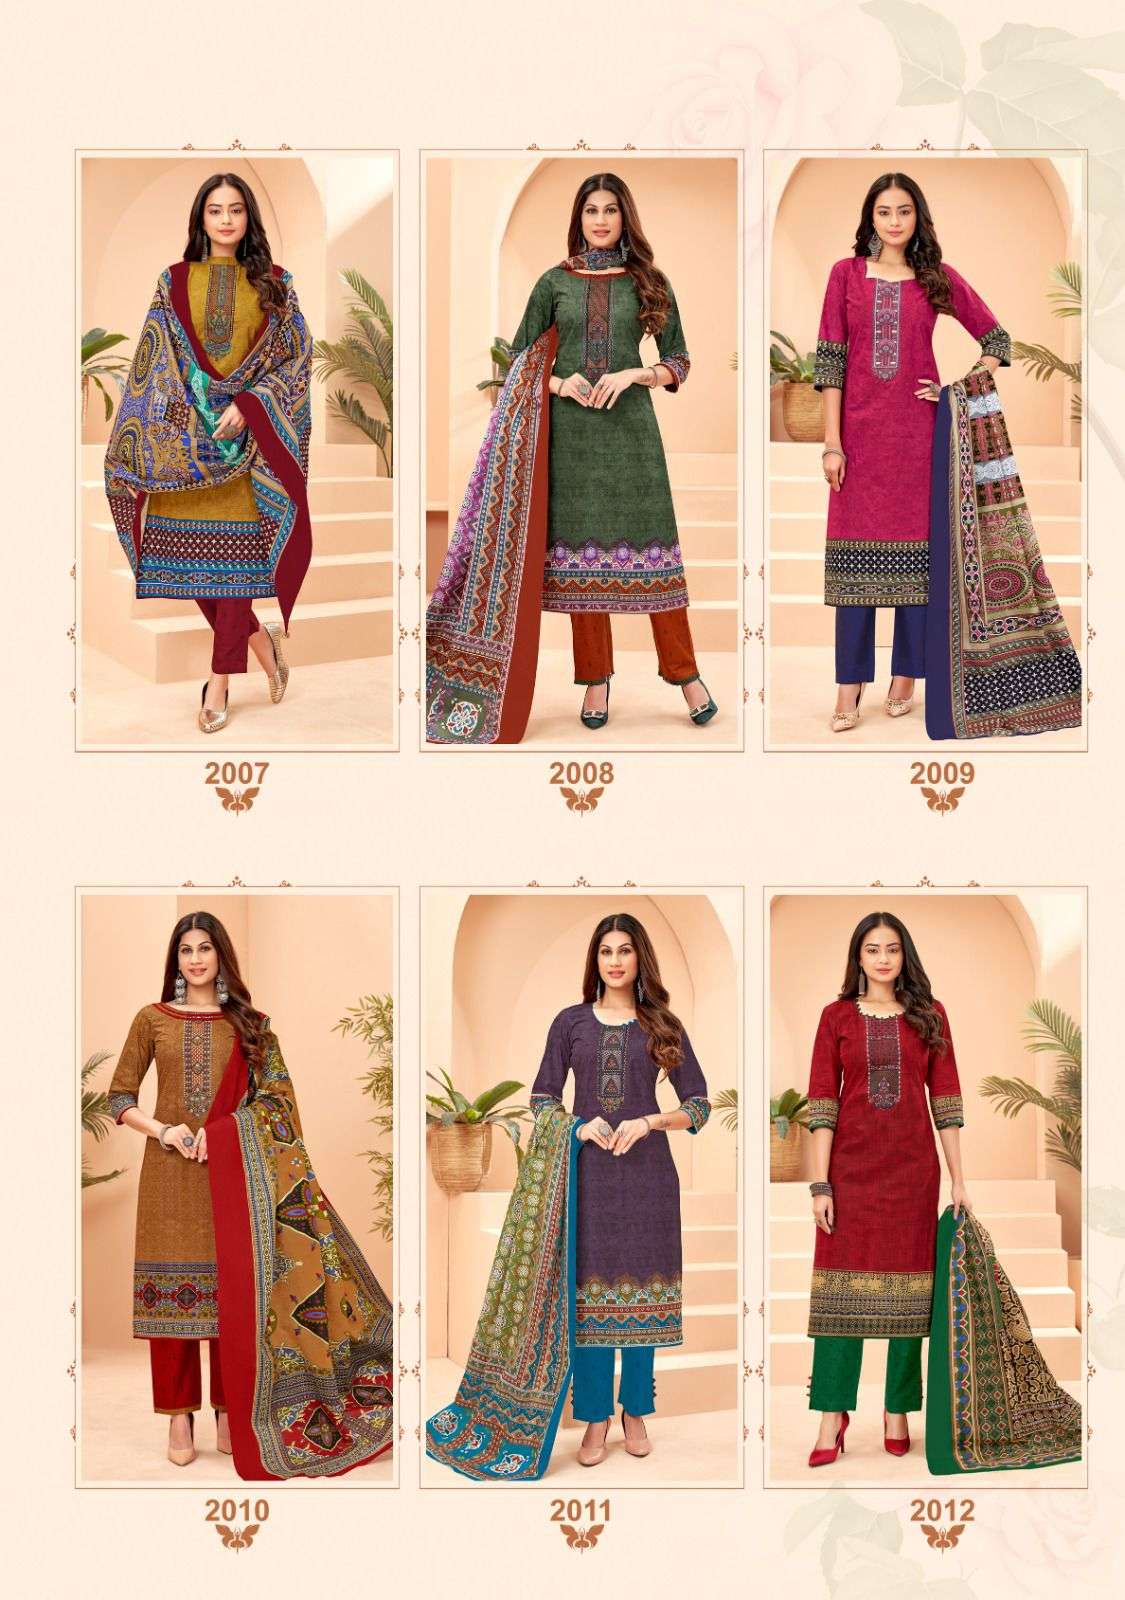 Balaji Netra Vol 2 Pure Cotton With Exclusive Embroidery Top Bottom With Dupatta On Wholesale